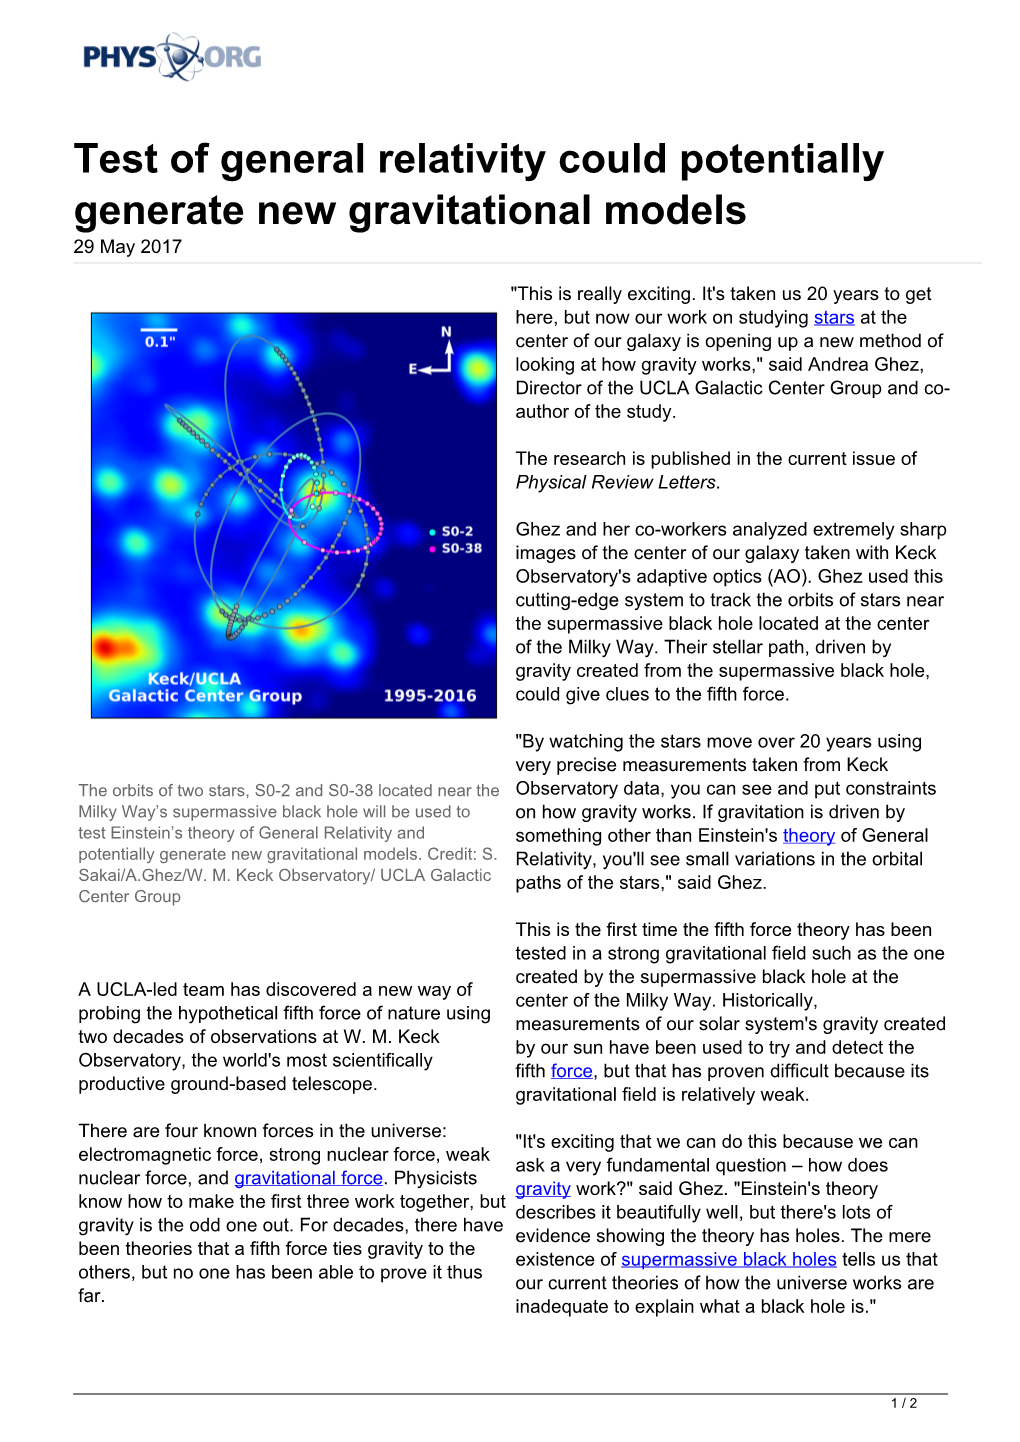 Test of General Relativity Could Potentially Generate New Gravitational Models 29 May 2017